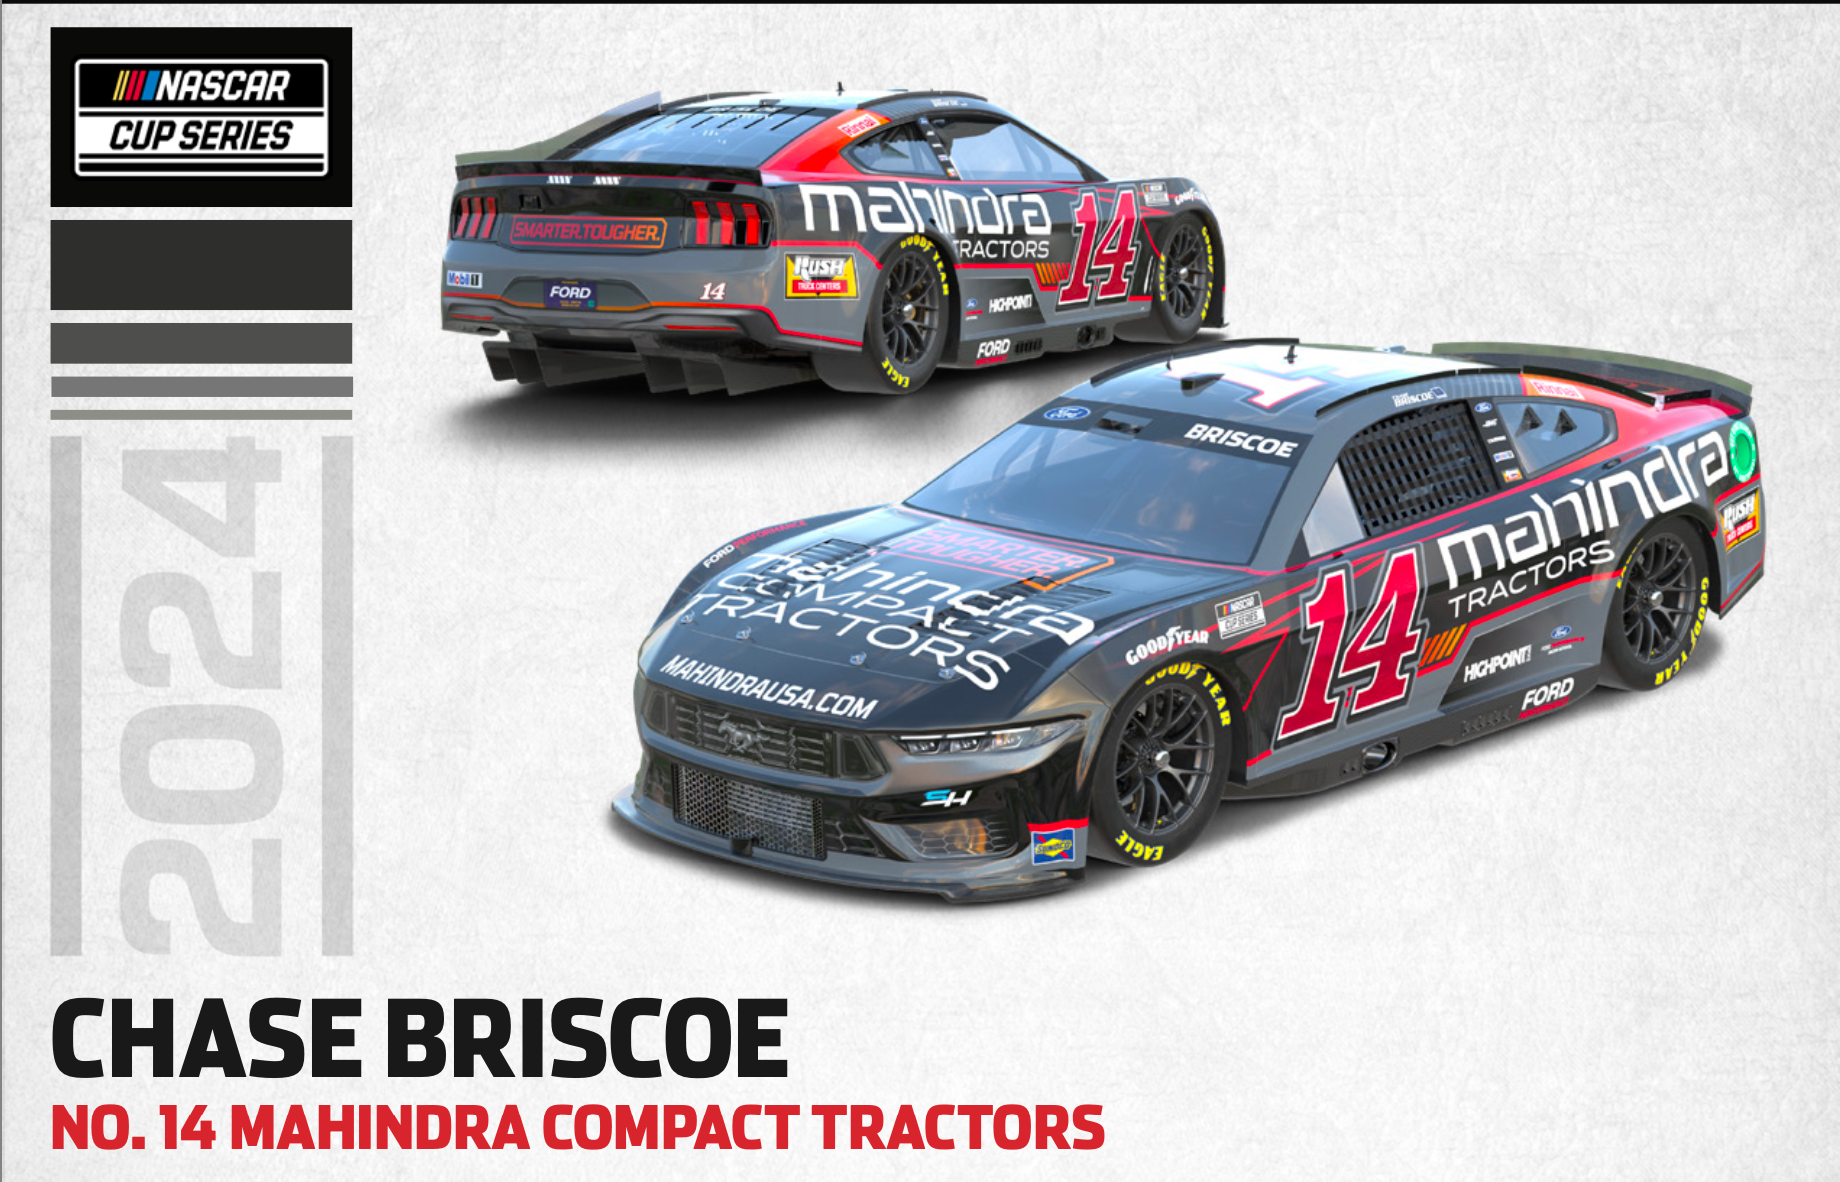 Lionel Racing - NASCAR Cup Series - Chase Briscoe - #14 Mahindra Compact Tractors